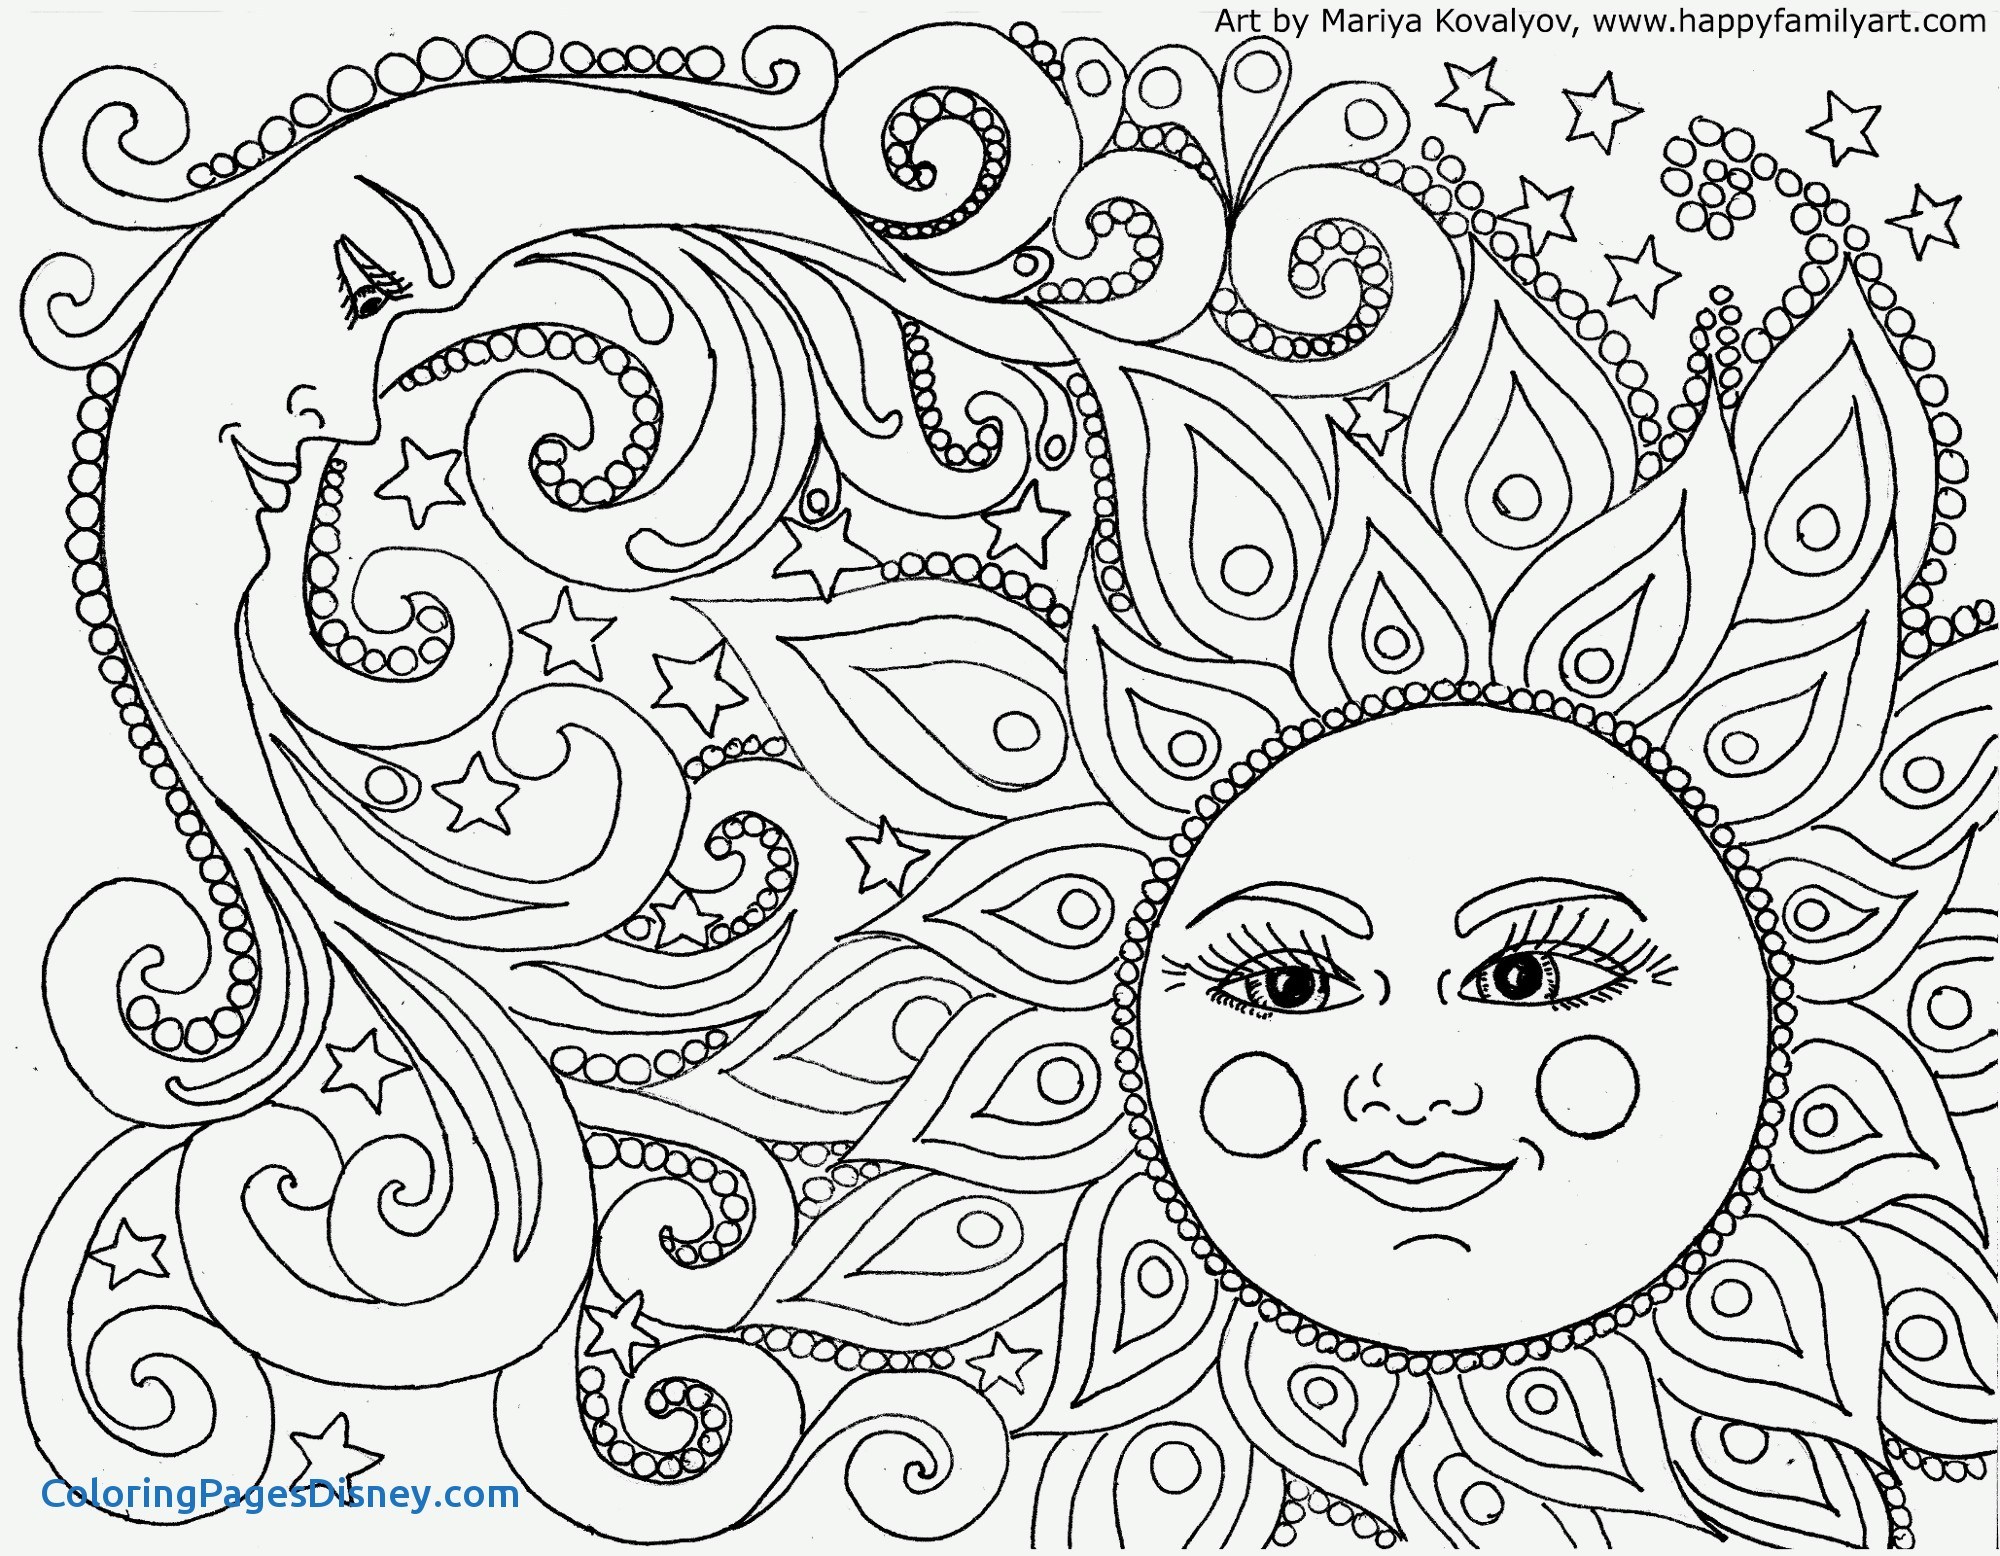 Sci Fi Coloring Pages at GetColorings.com | Free printable colorings